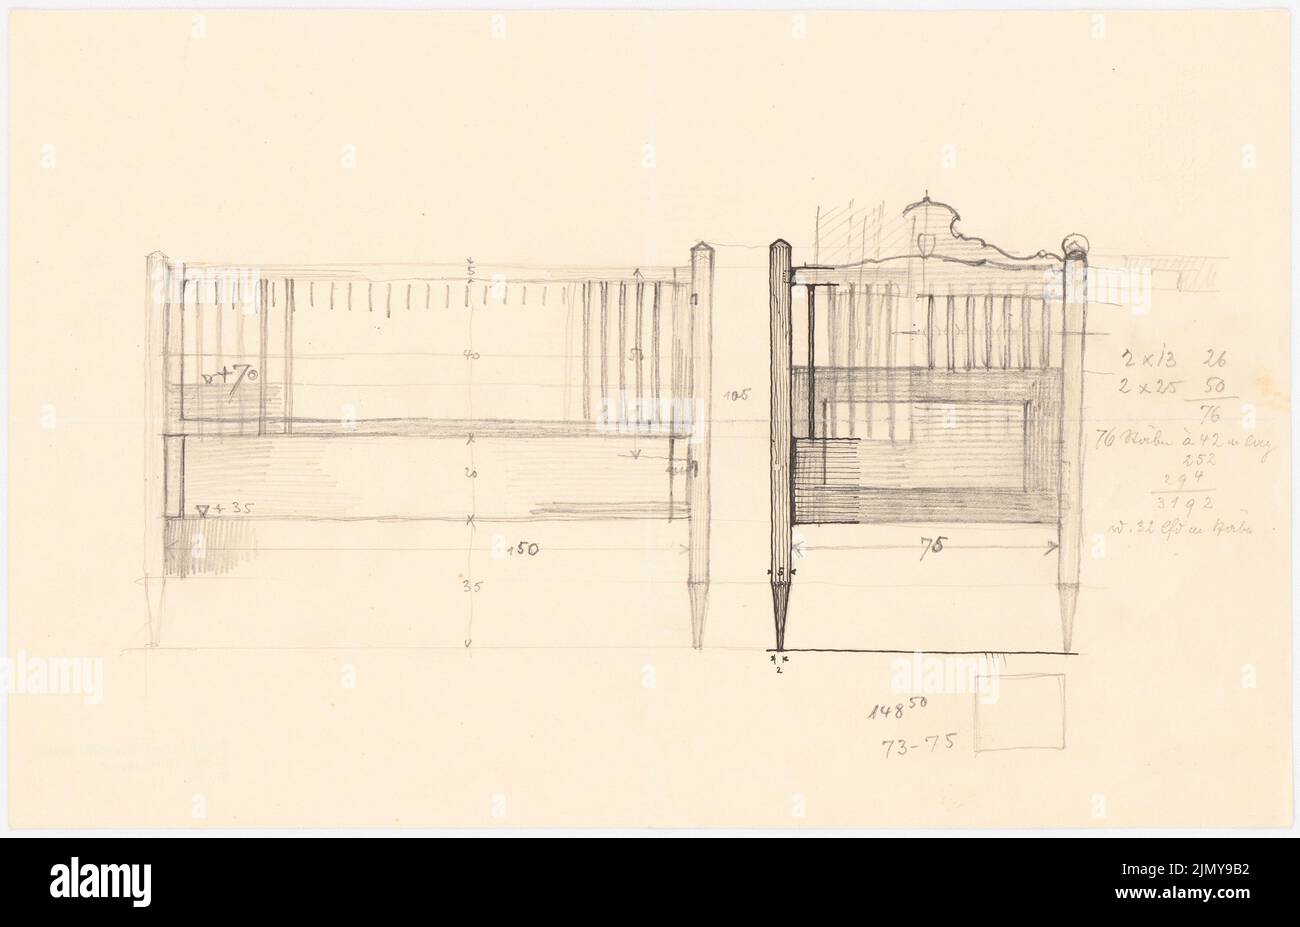 Rüster Emil (1883-1949), cot (without date): detailed views. Pencil and ink on paper, 21.5 x 33.4 cm (including scan edges) Stock Photo